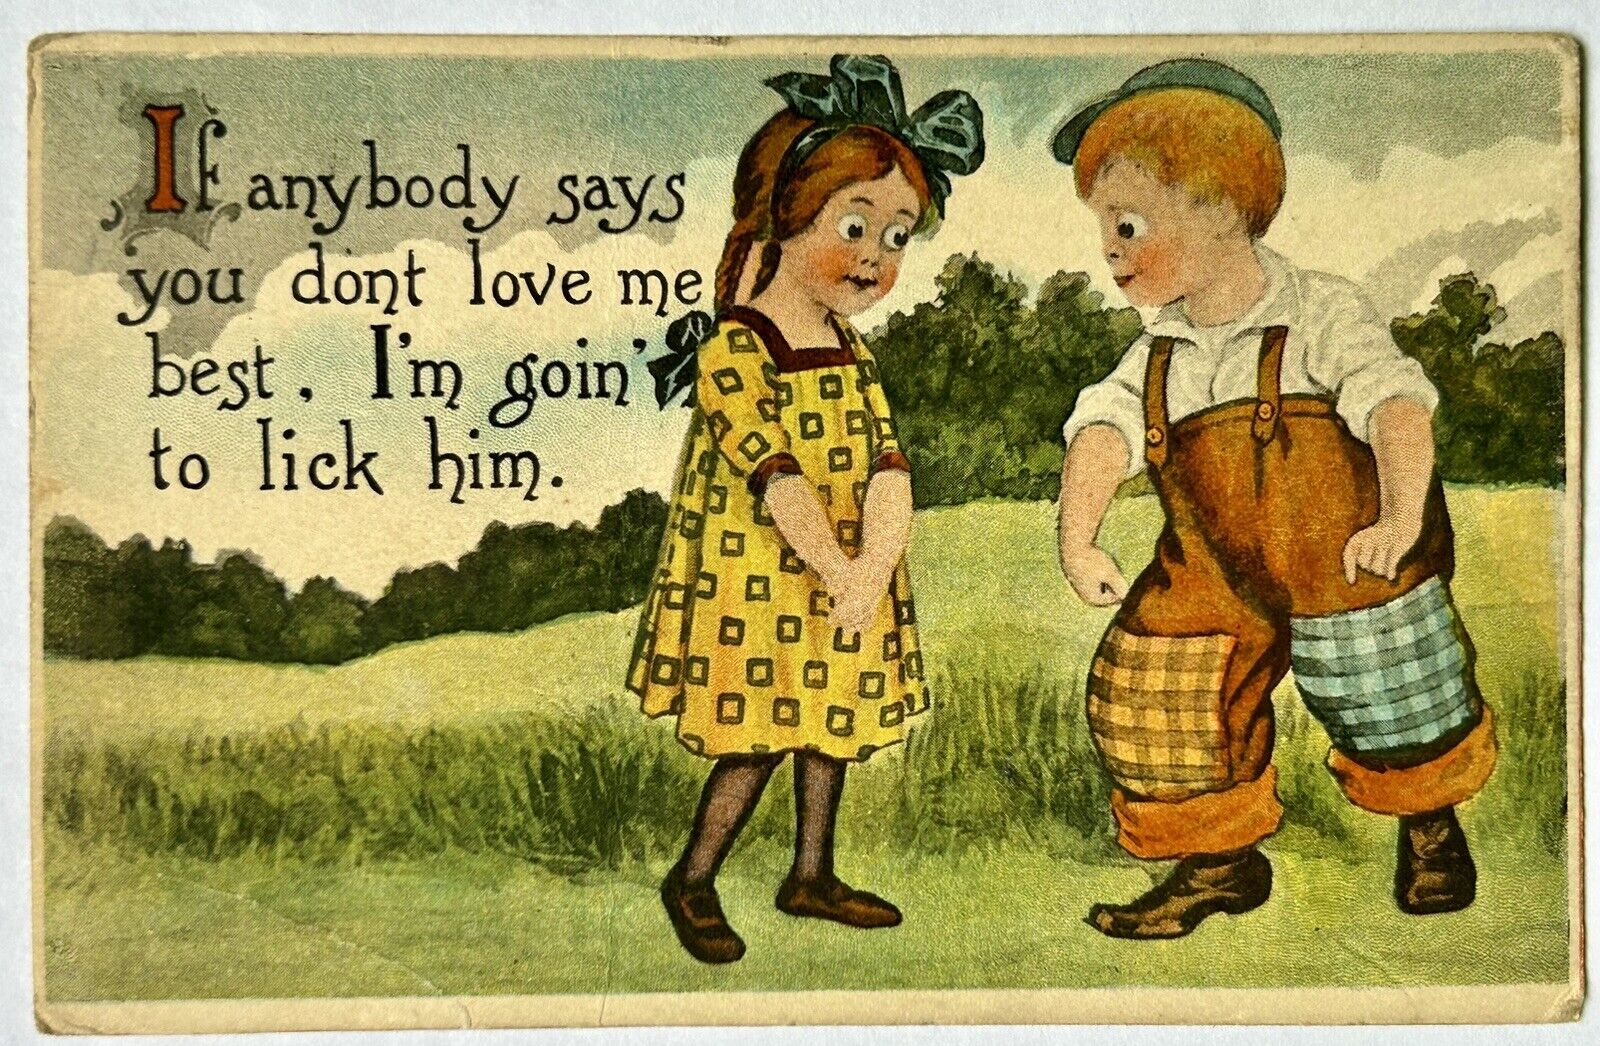 If anybody says you dont love me best. I\'m goin to lick him. Love postcard 1913